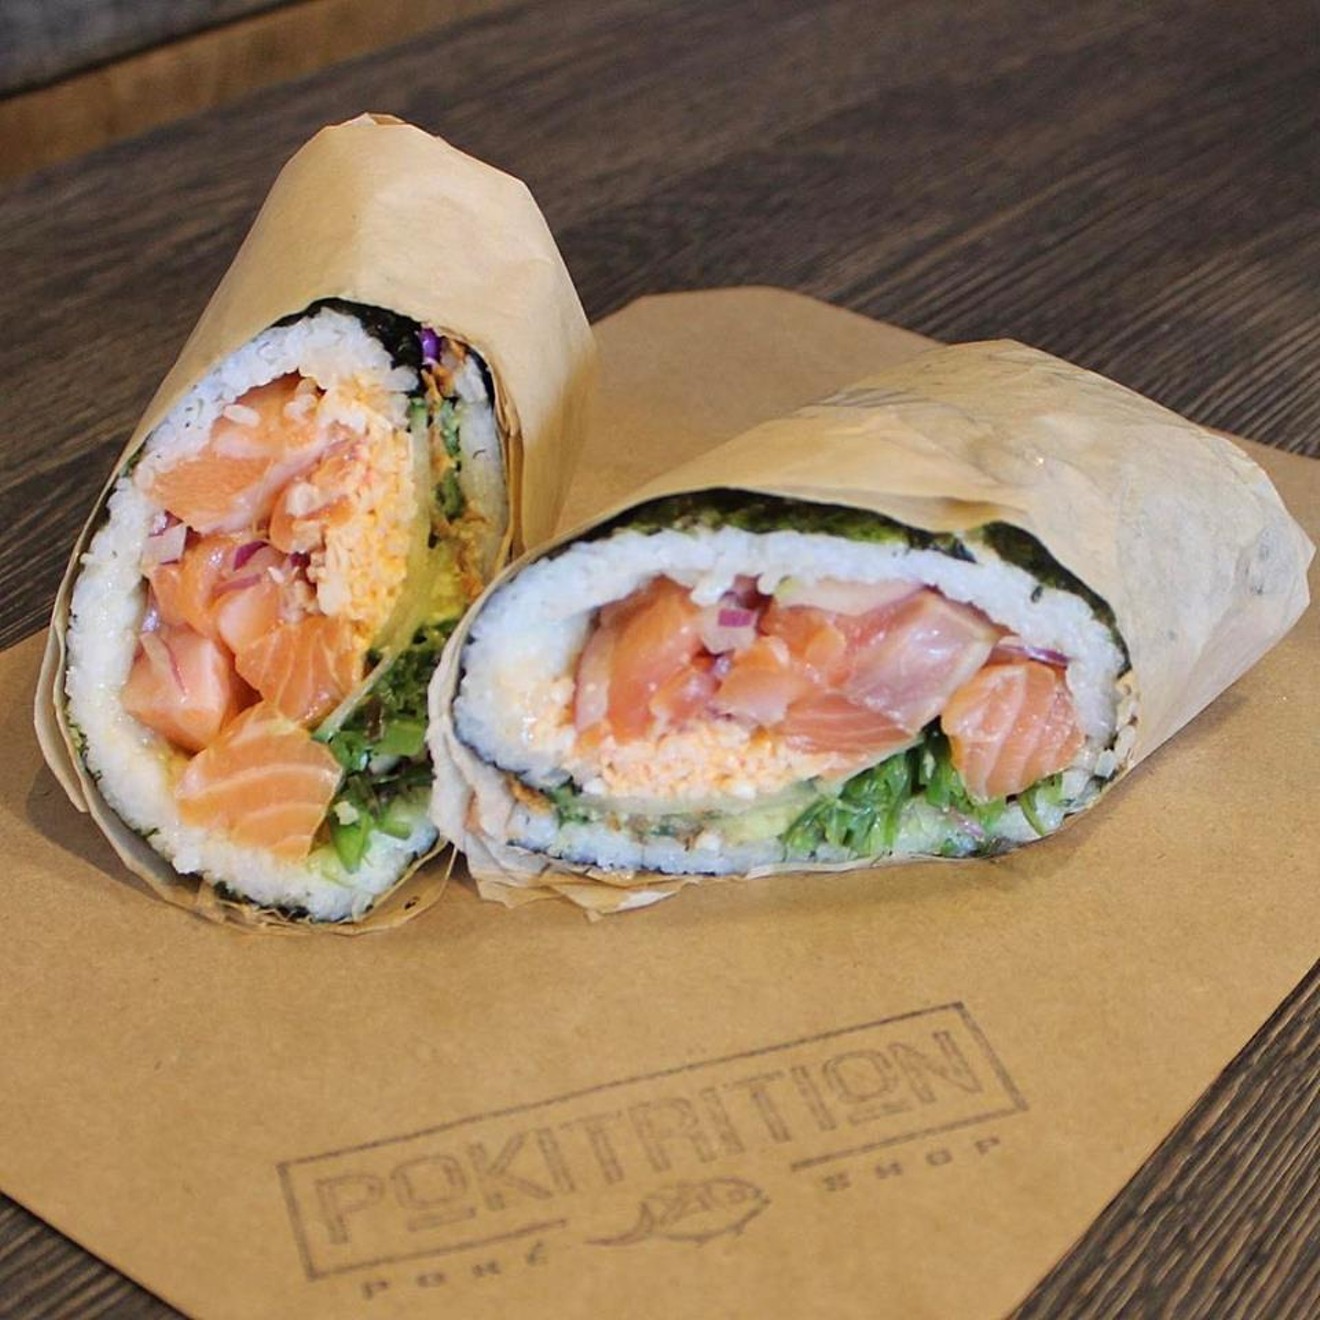 Pokitrition, a new poke bowl shop in Chandler, bills itself as the Valley's first spot for sushi burritos.